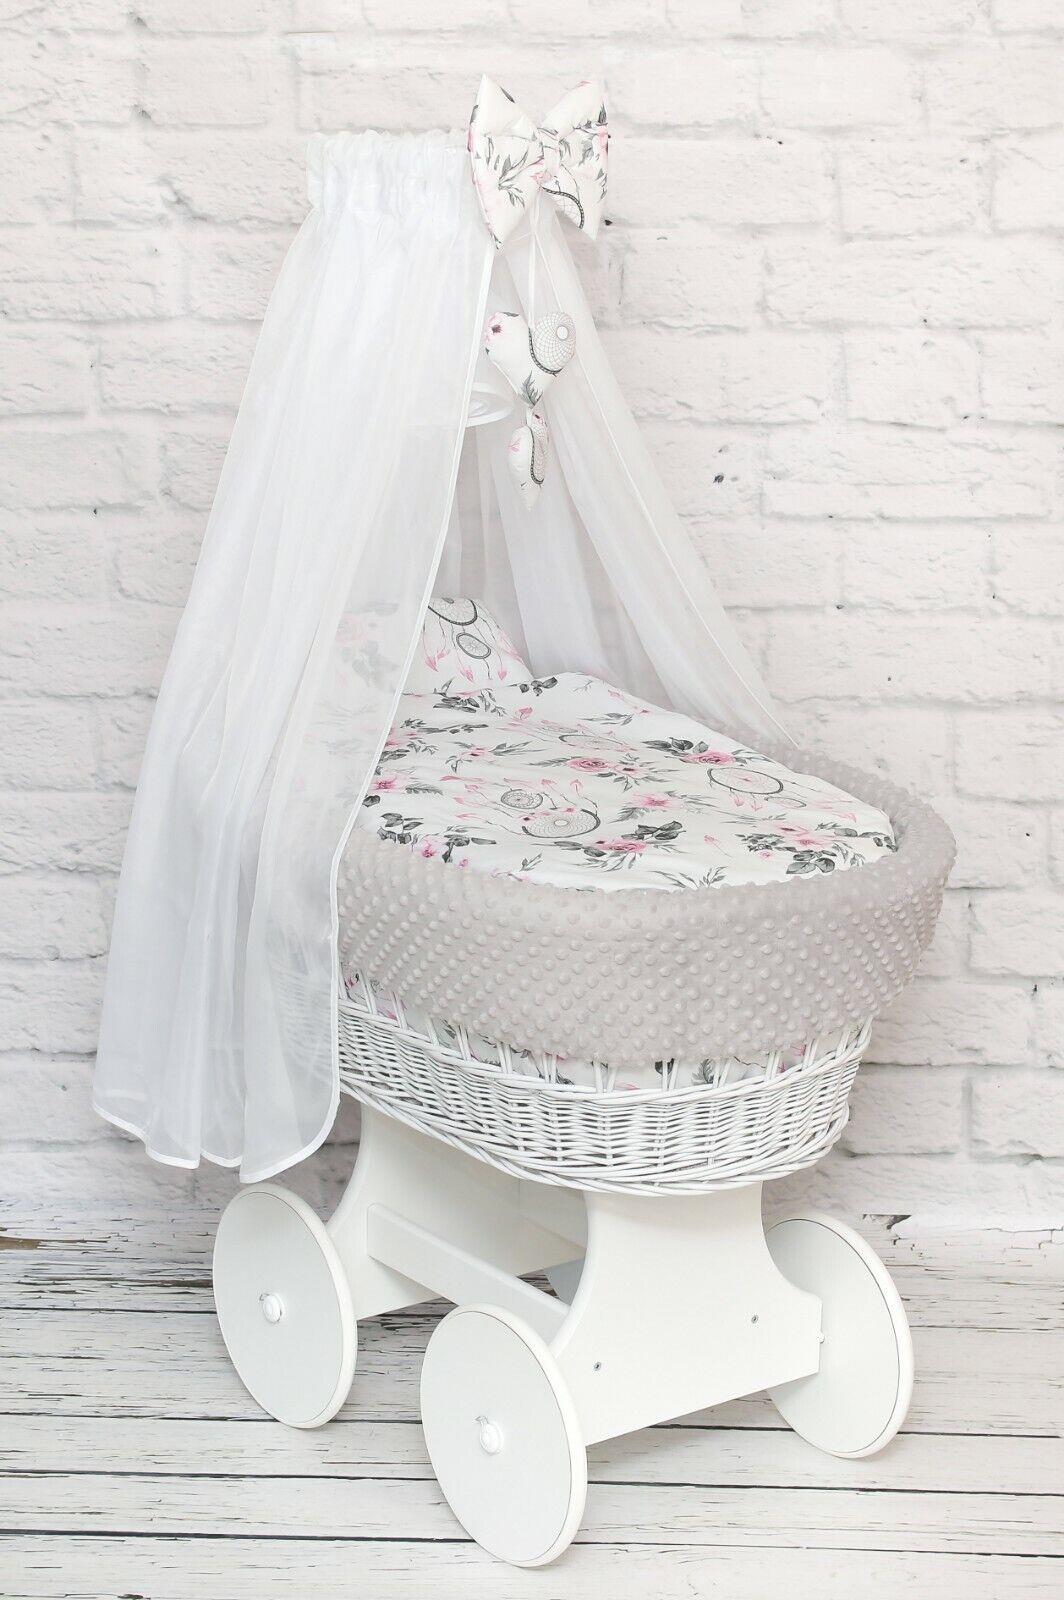 White Wicker Moses Basket with Wheels Baby+full Bedding Set Dream catcher dimple grey